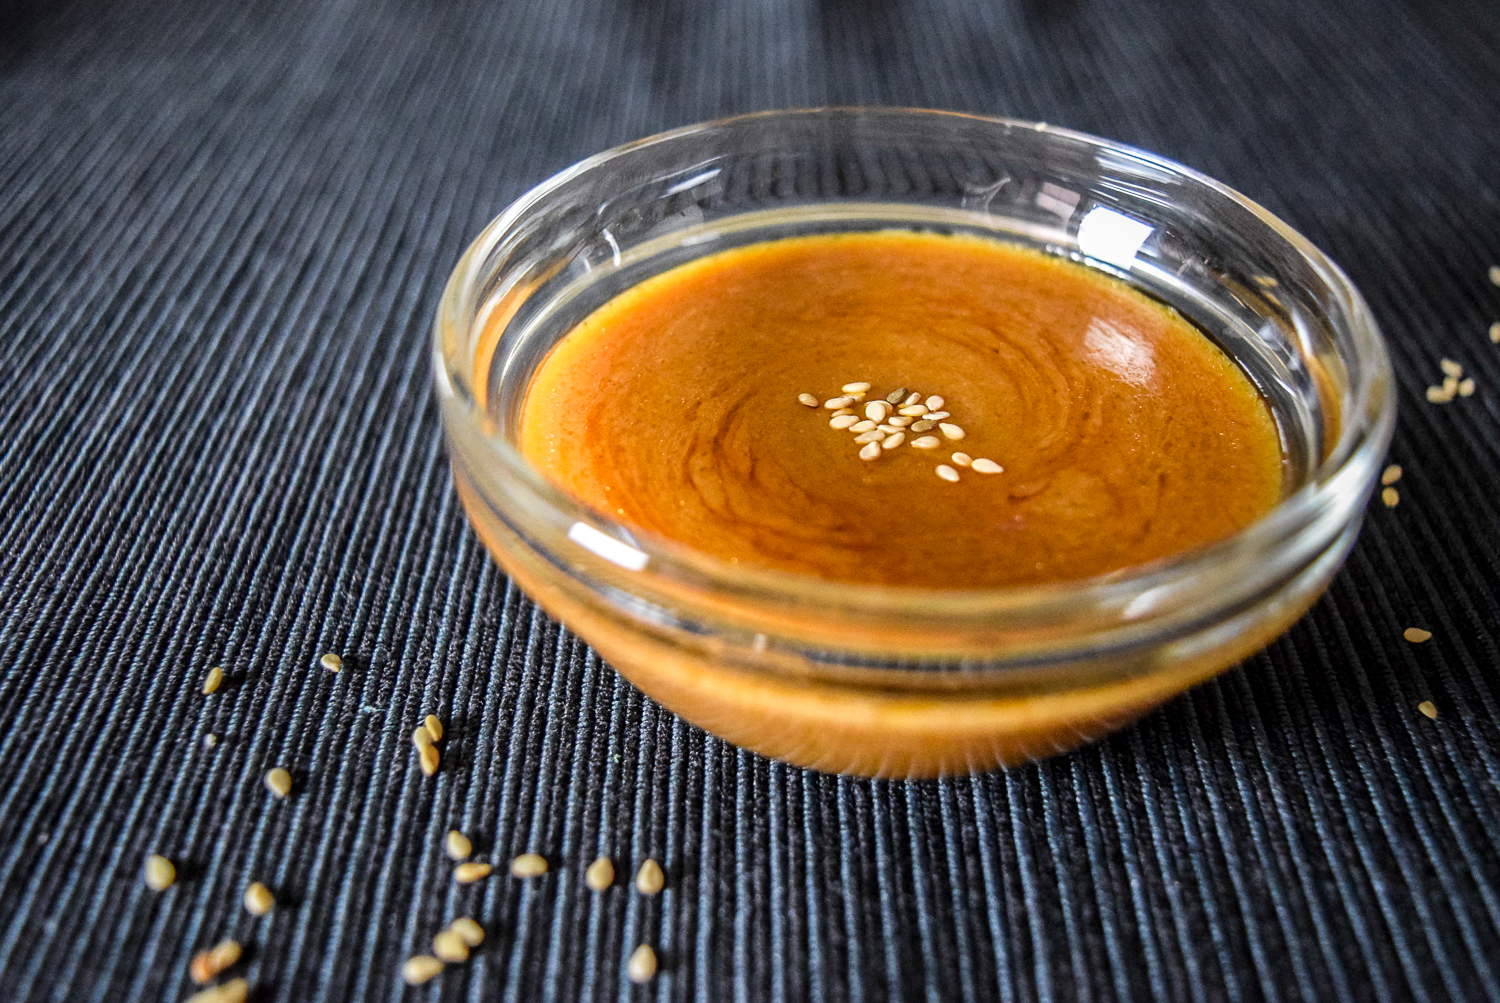 Chili miso sauce garnished with sesame seeds